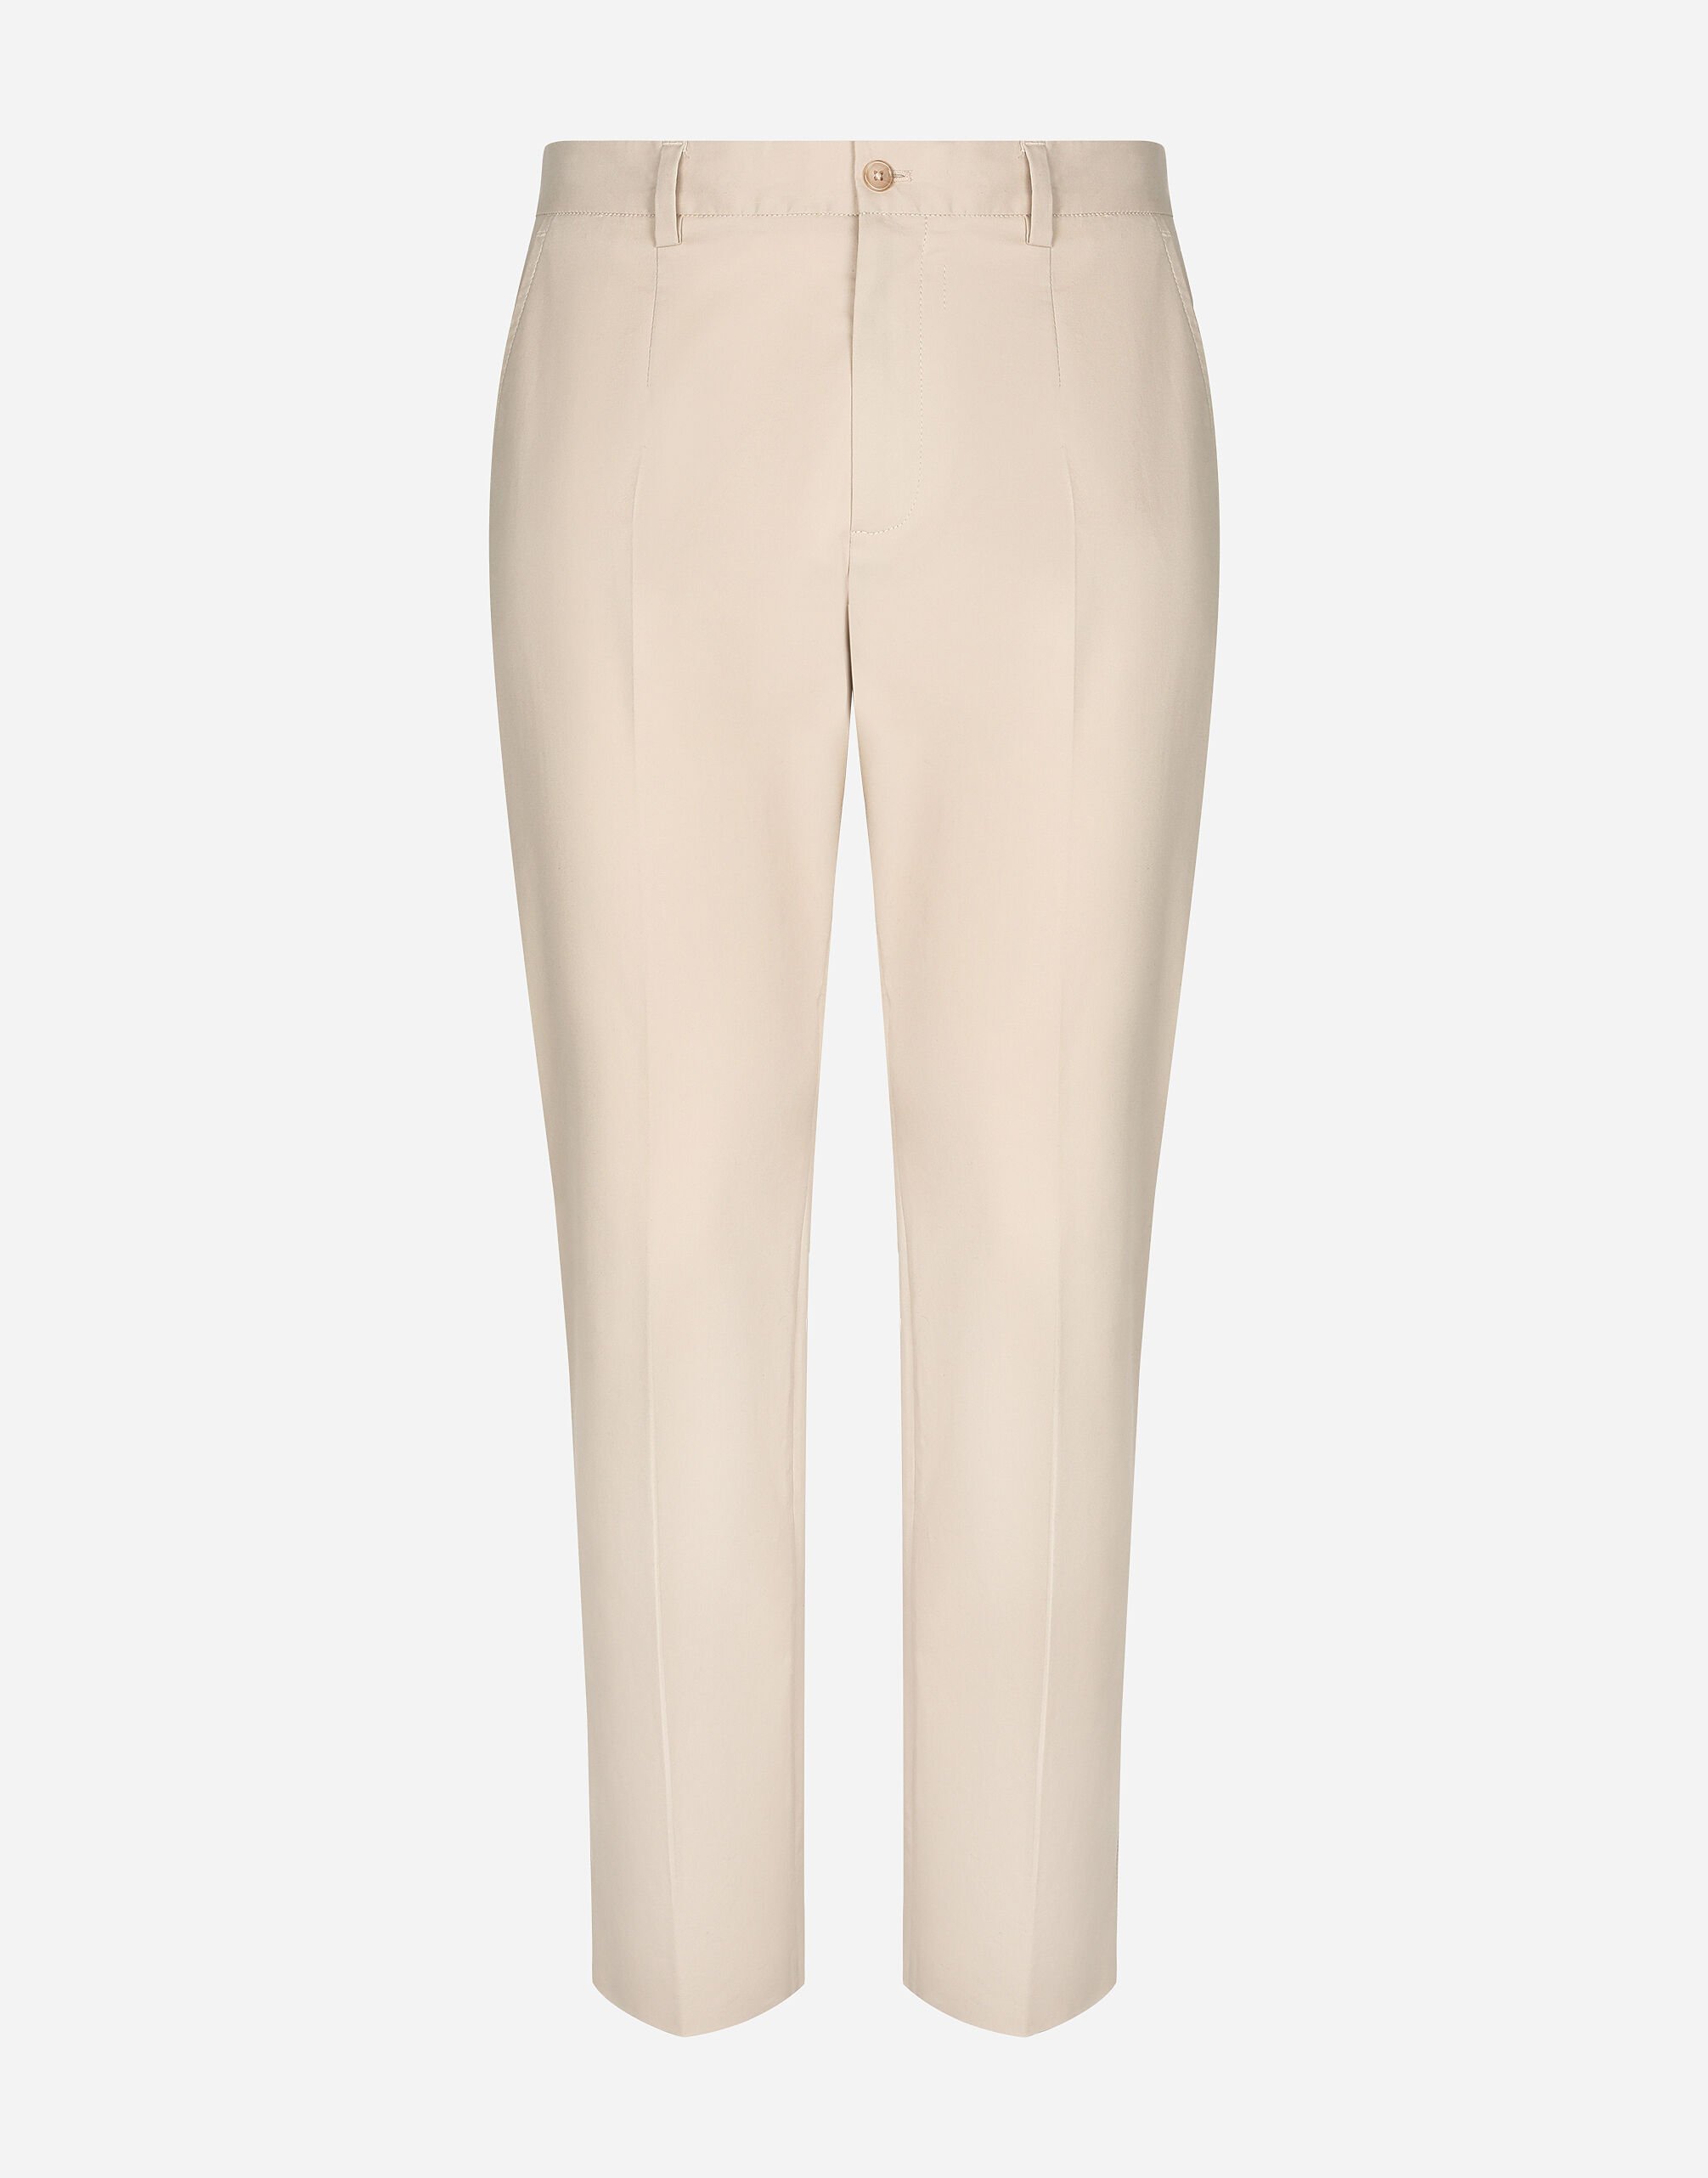 ${brand} Stretch cotton pants with branded tag ${colorDescription} ${masterID}